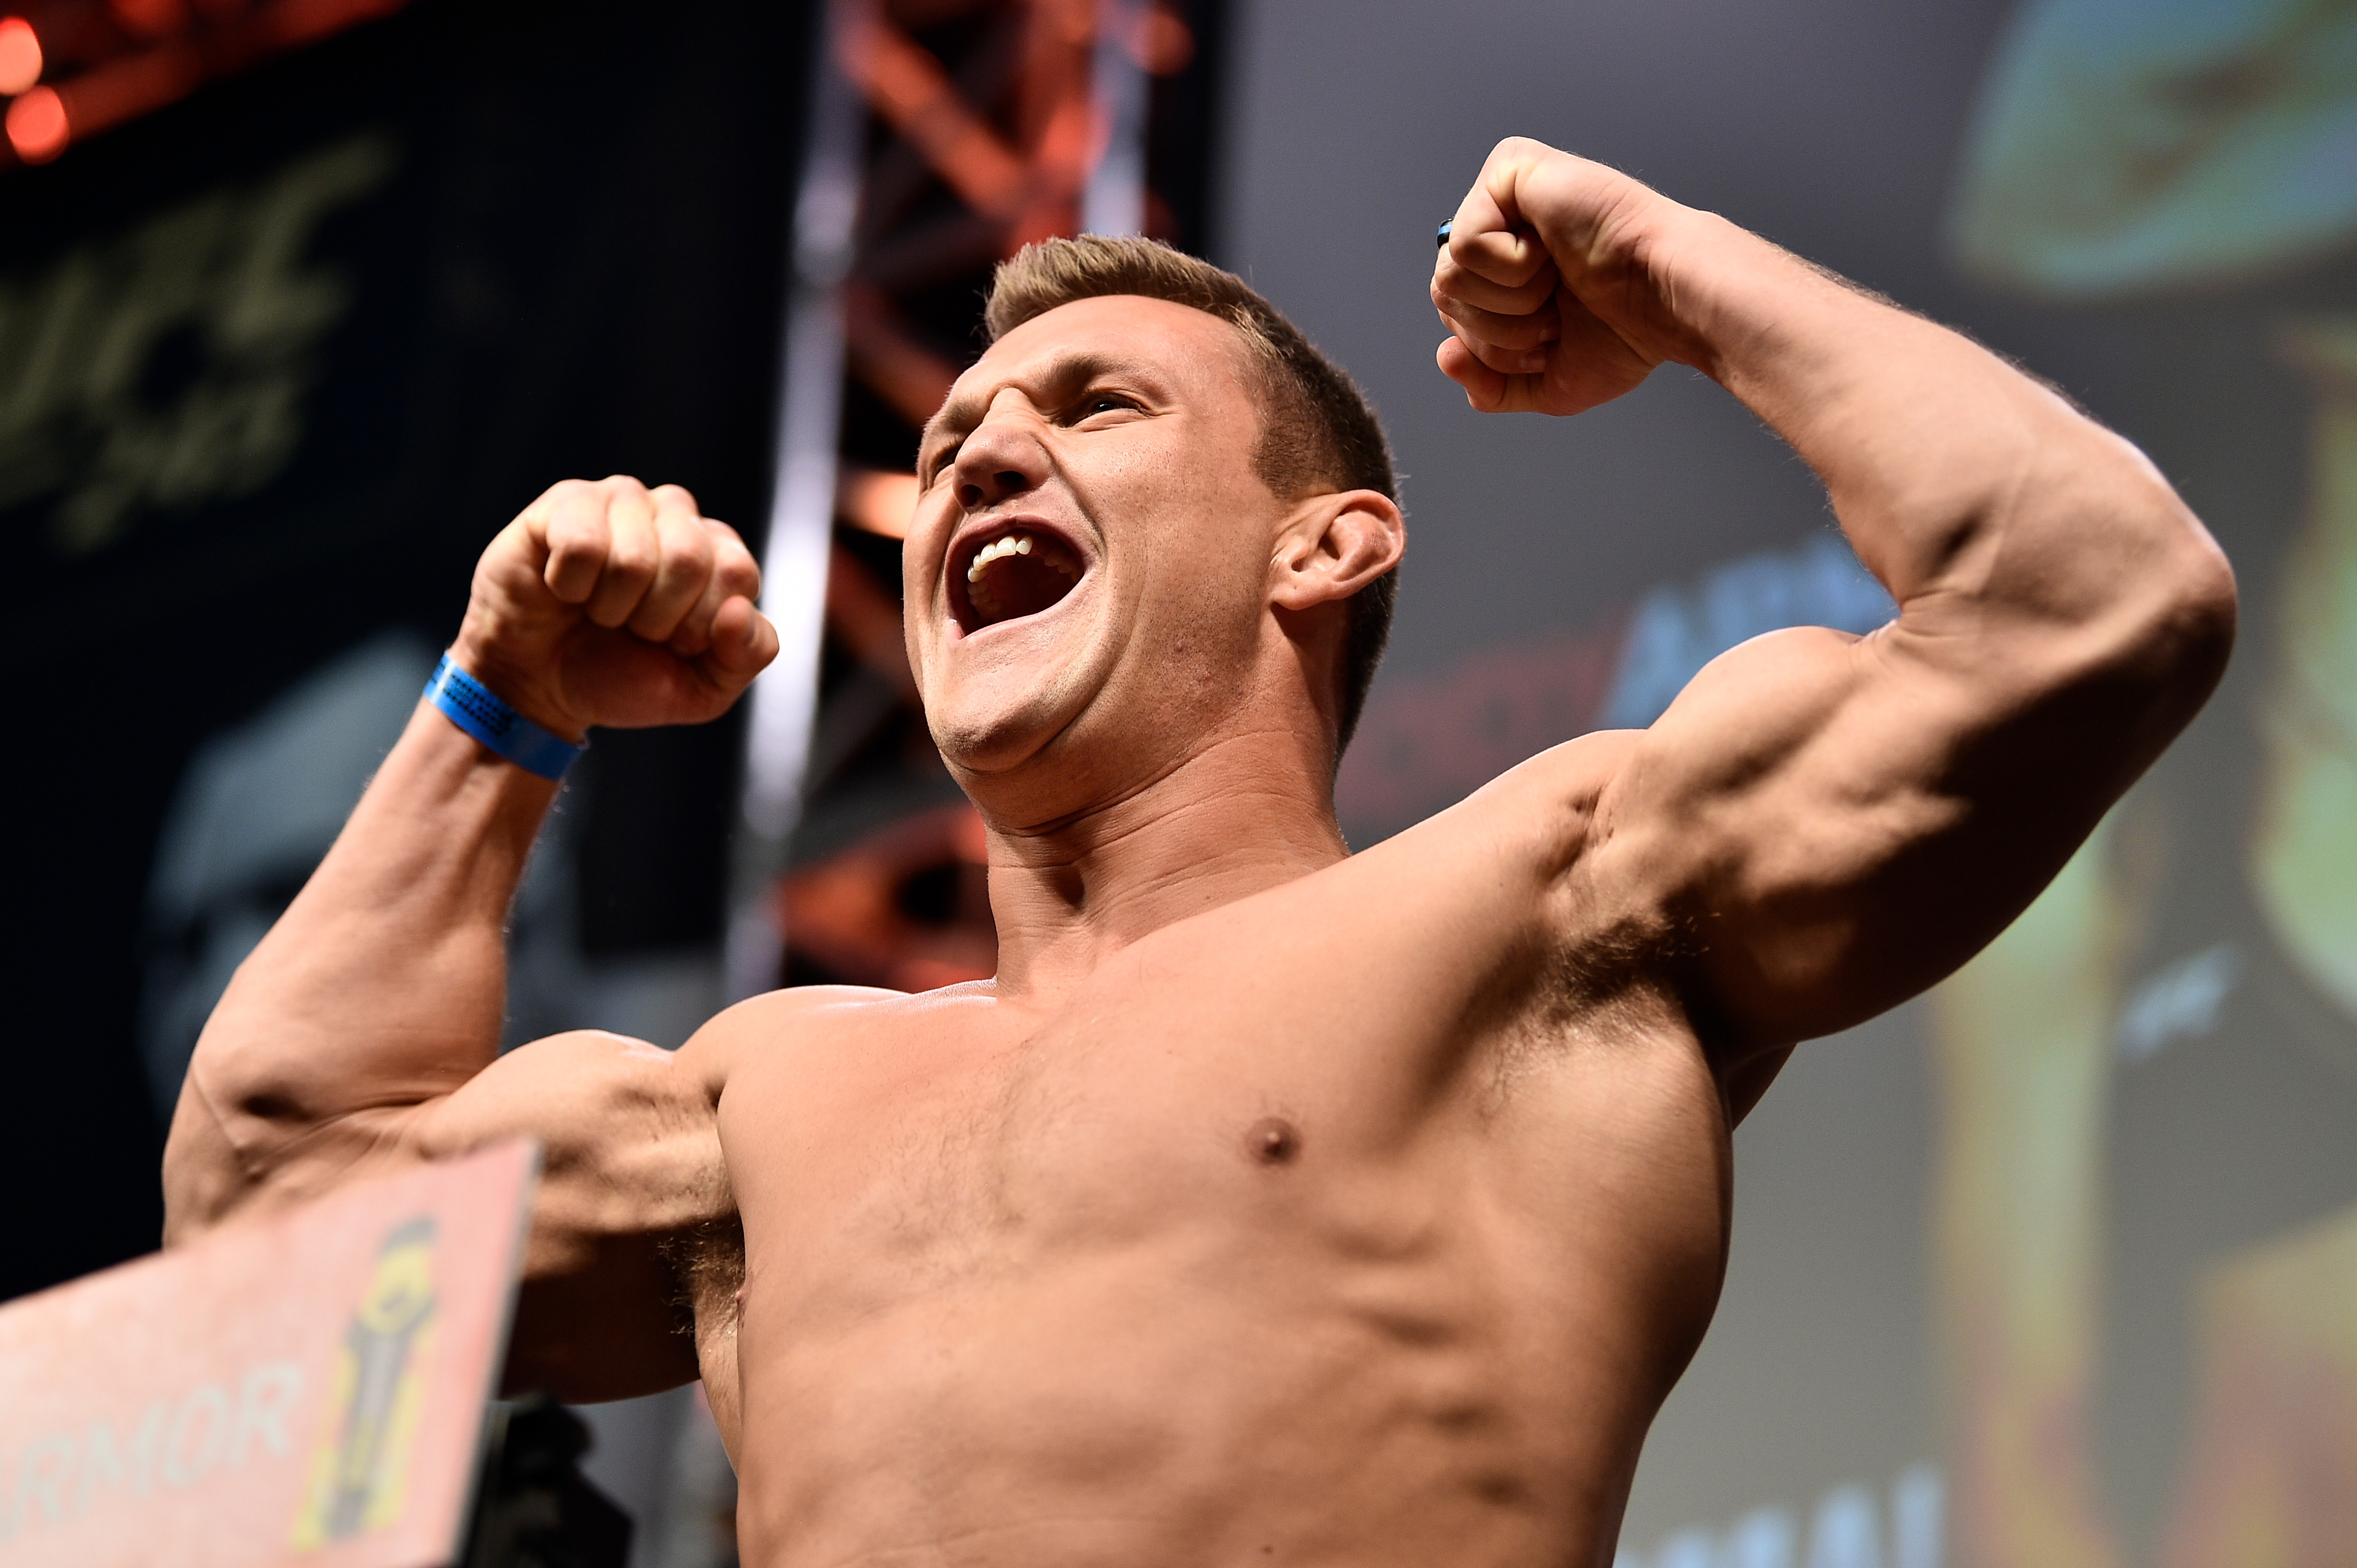 UFC Fighter Ian Heinisch Learned About MMA in a Foreign Prison: ‘I Turned My Body Into a Weapon’